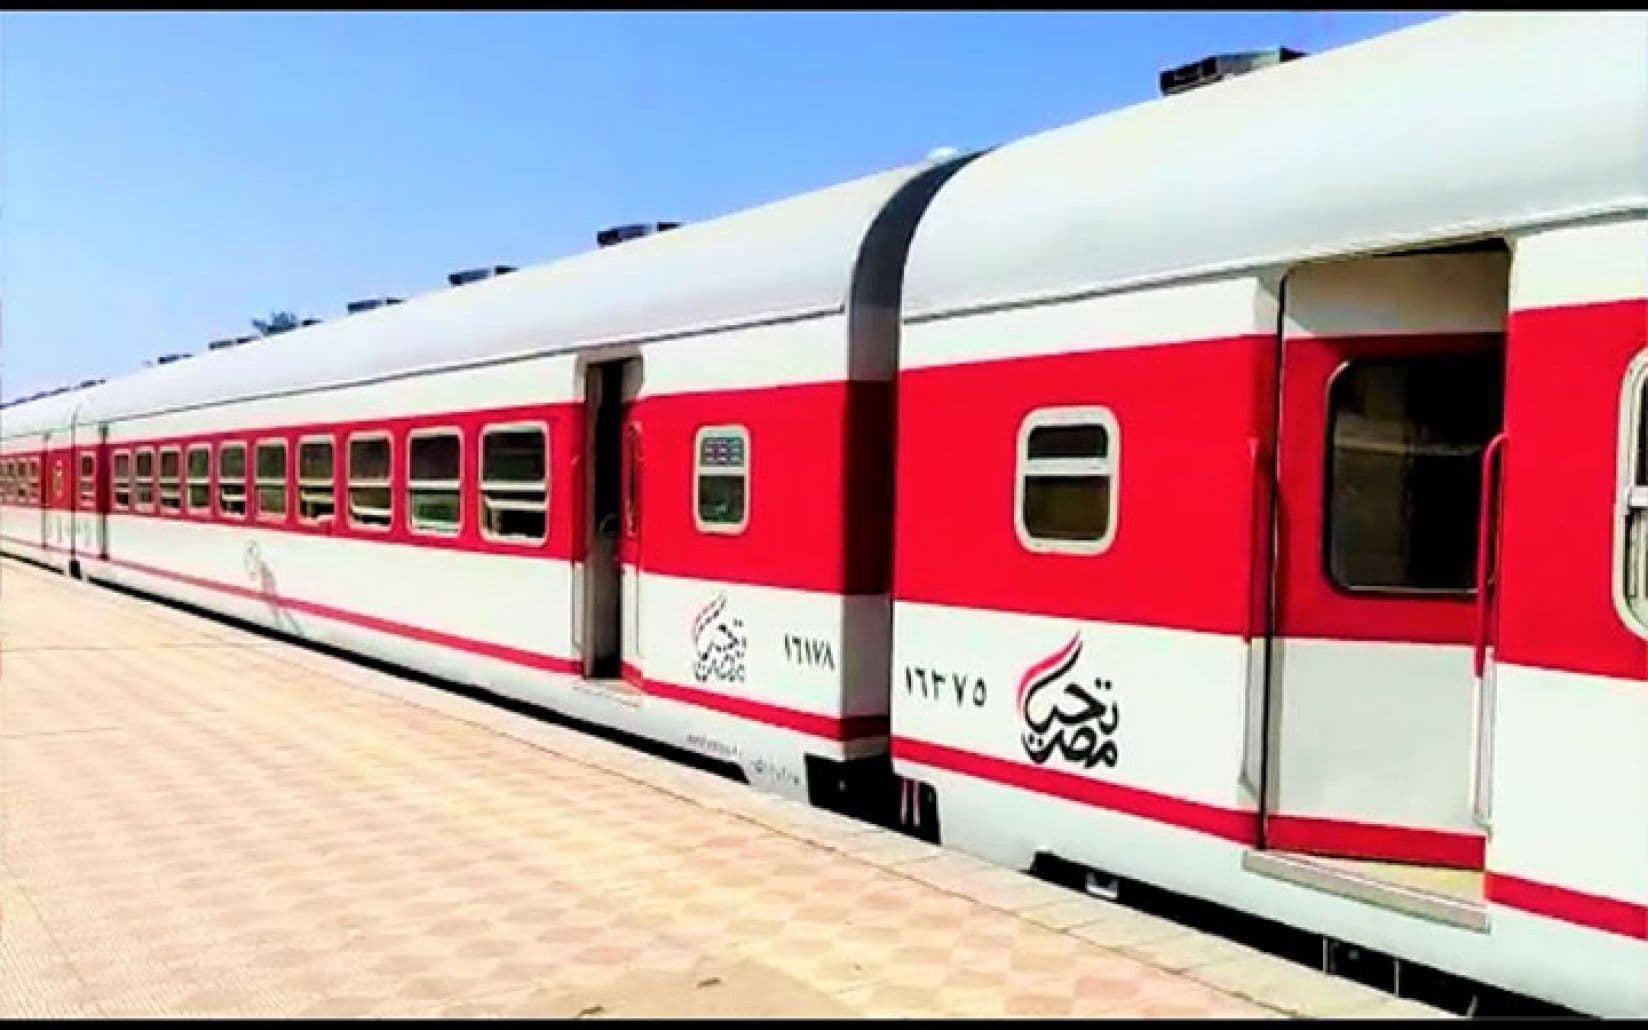 How and Where Can You Subscribe to the “Tahya Misr” Train?